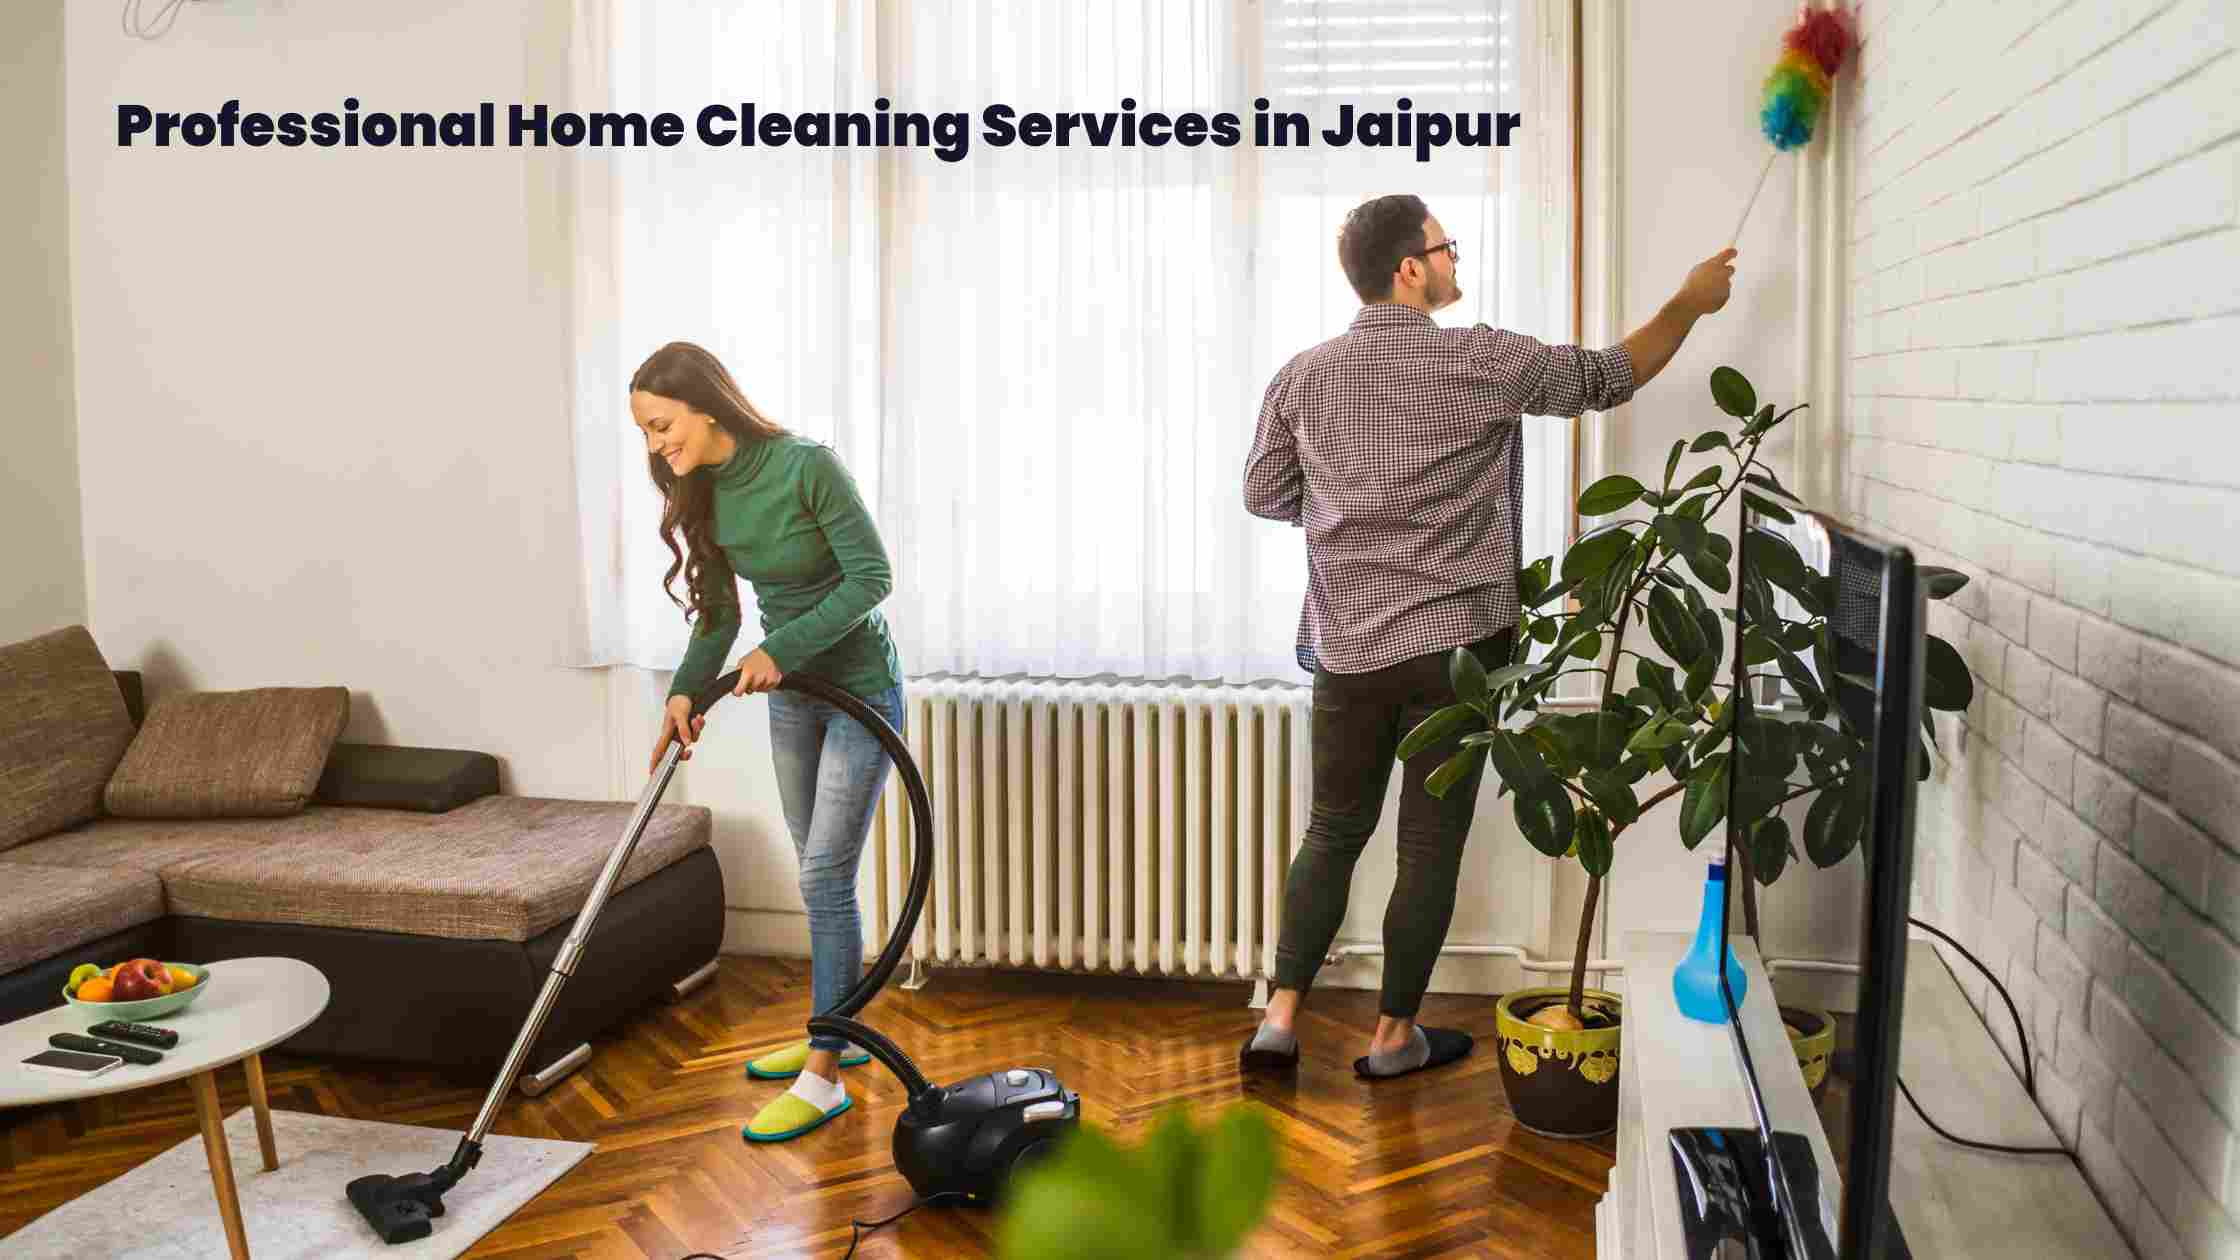 Professional Home Cleaning Services in Jaipur | Busy Bucket